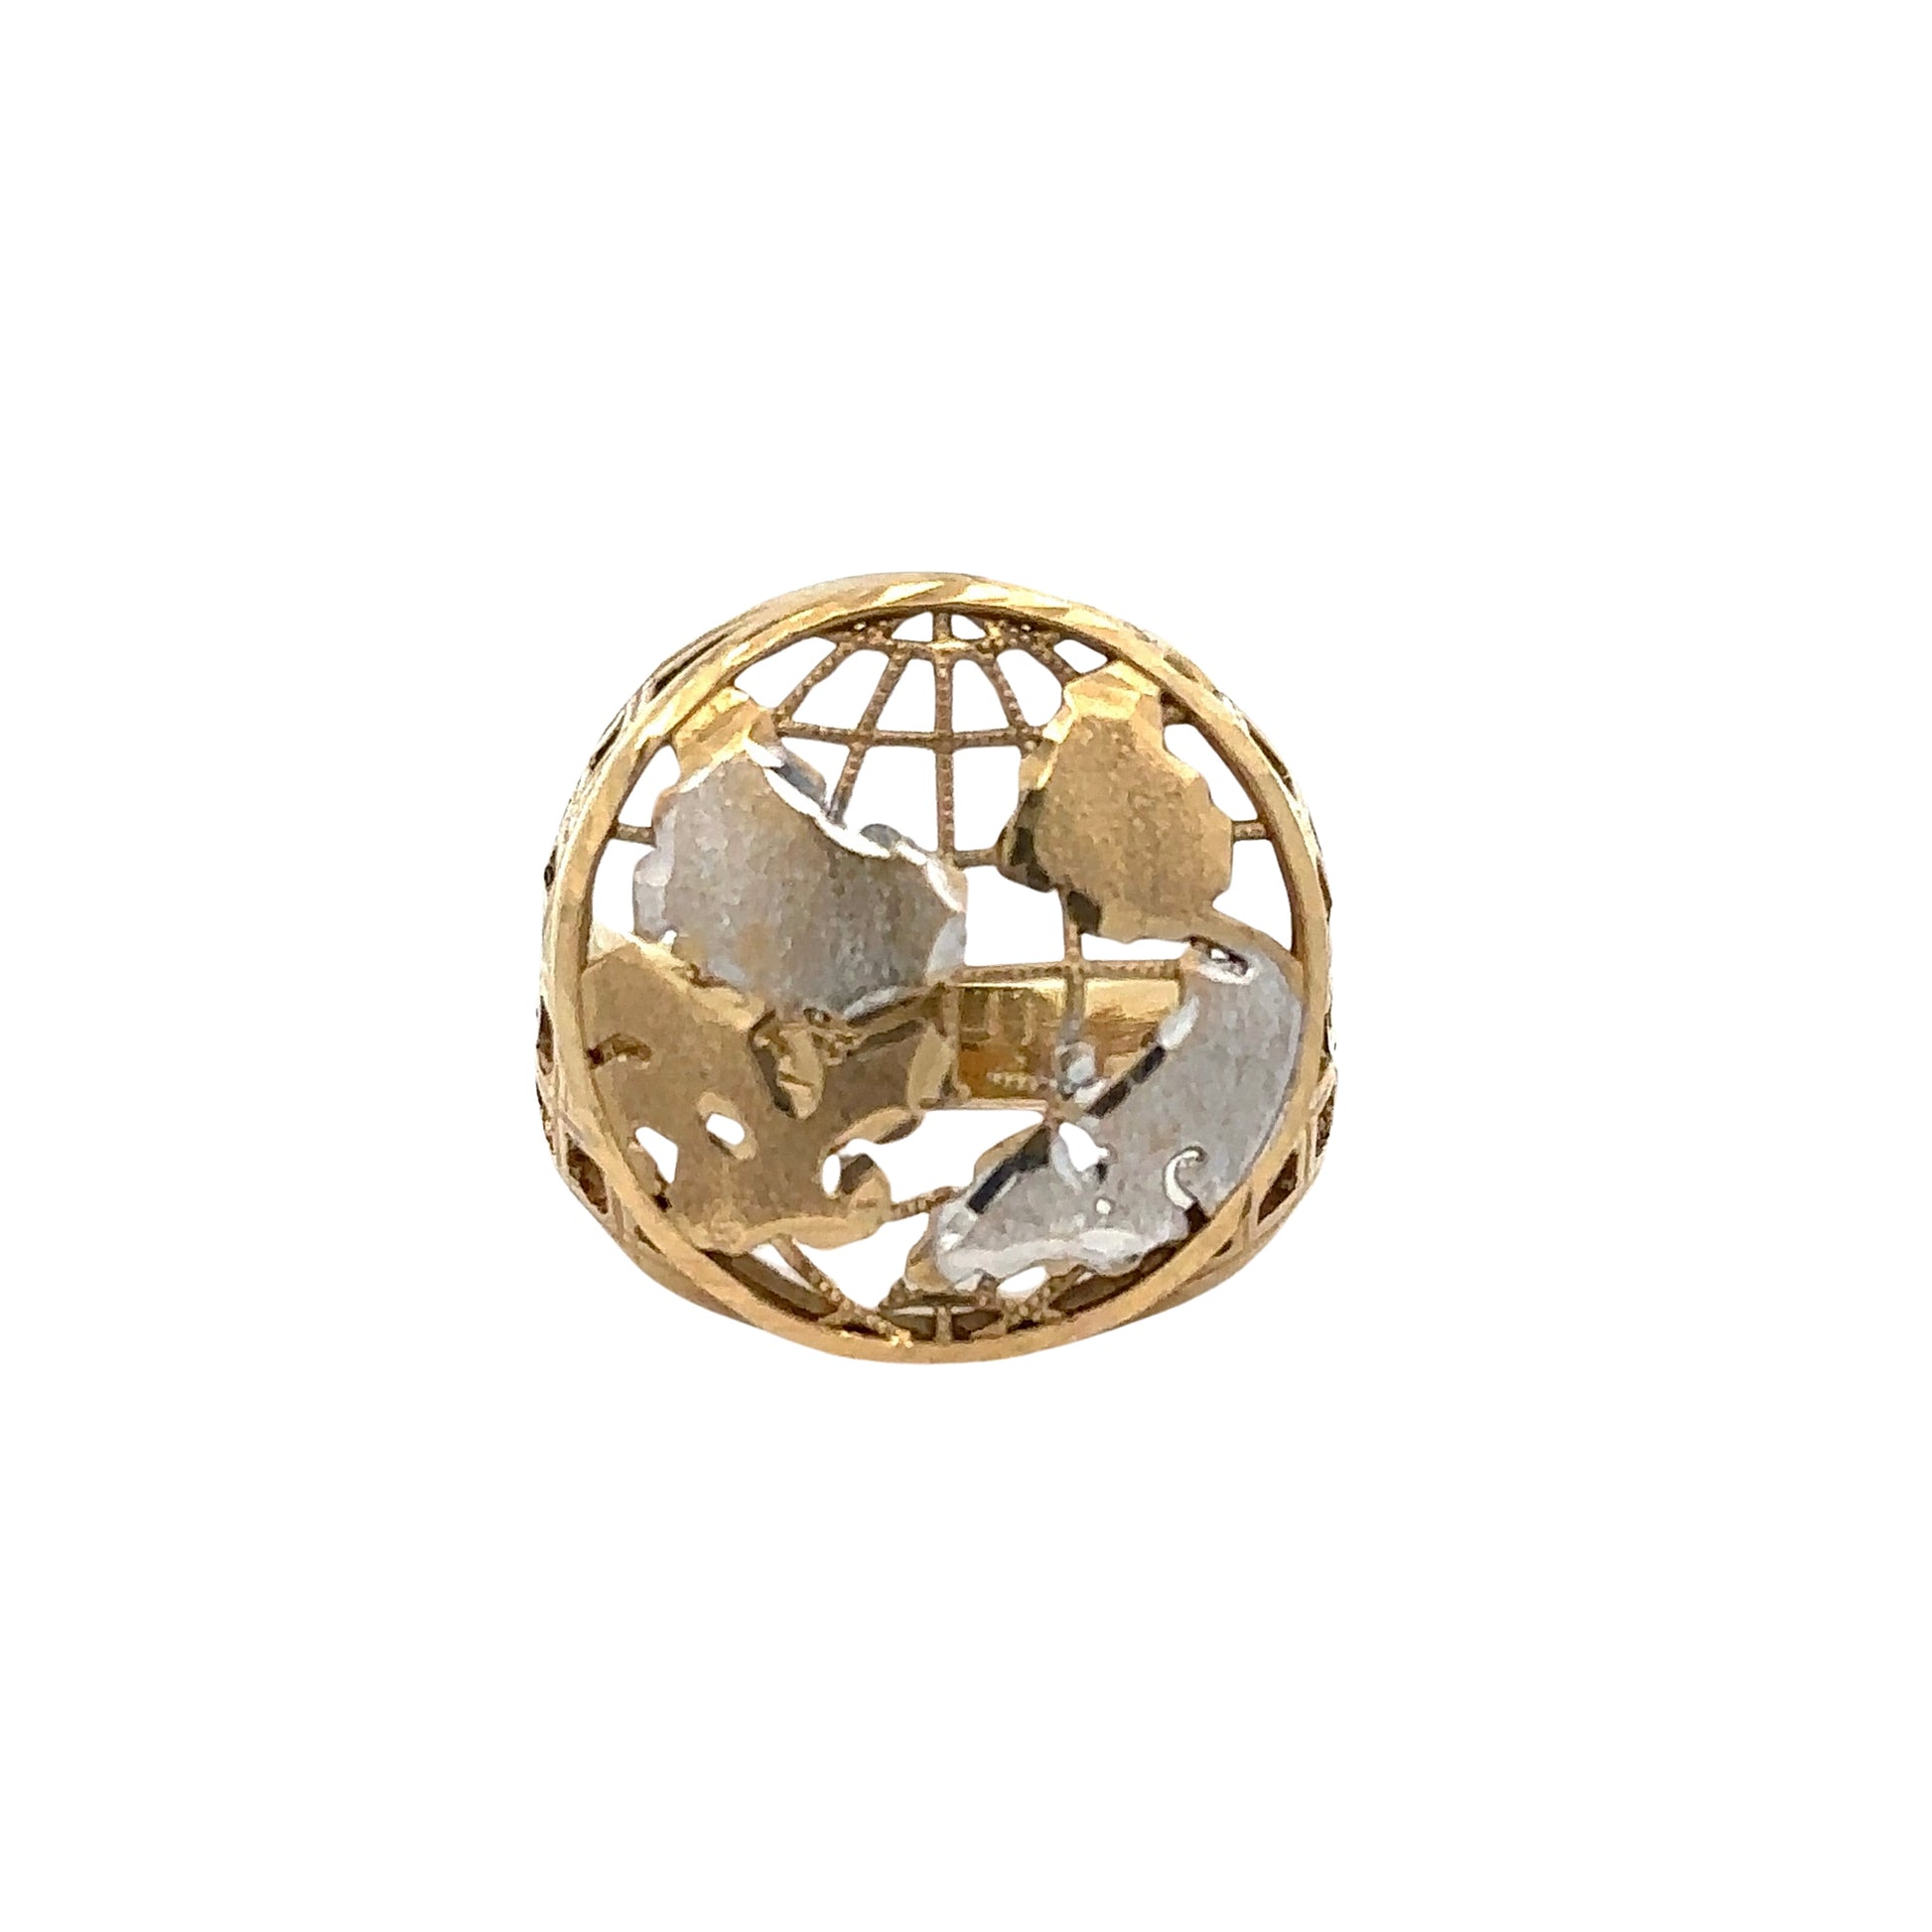 Front of World Ring. Continents are yellow and white gold.